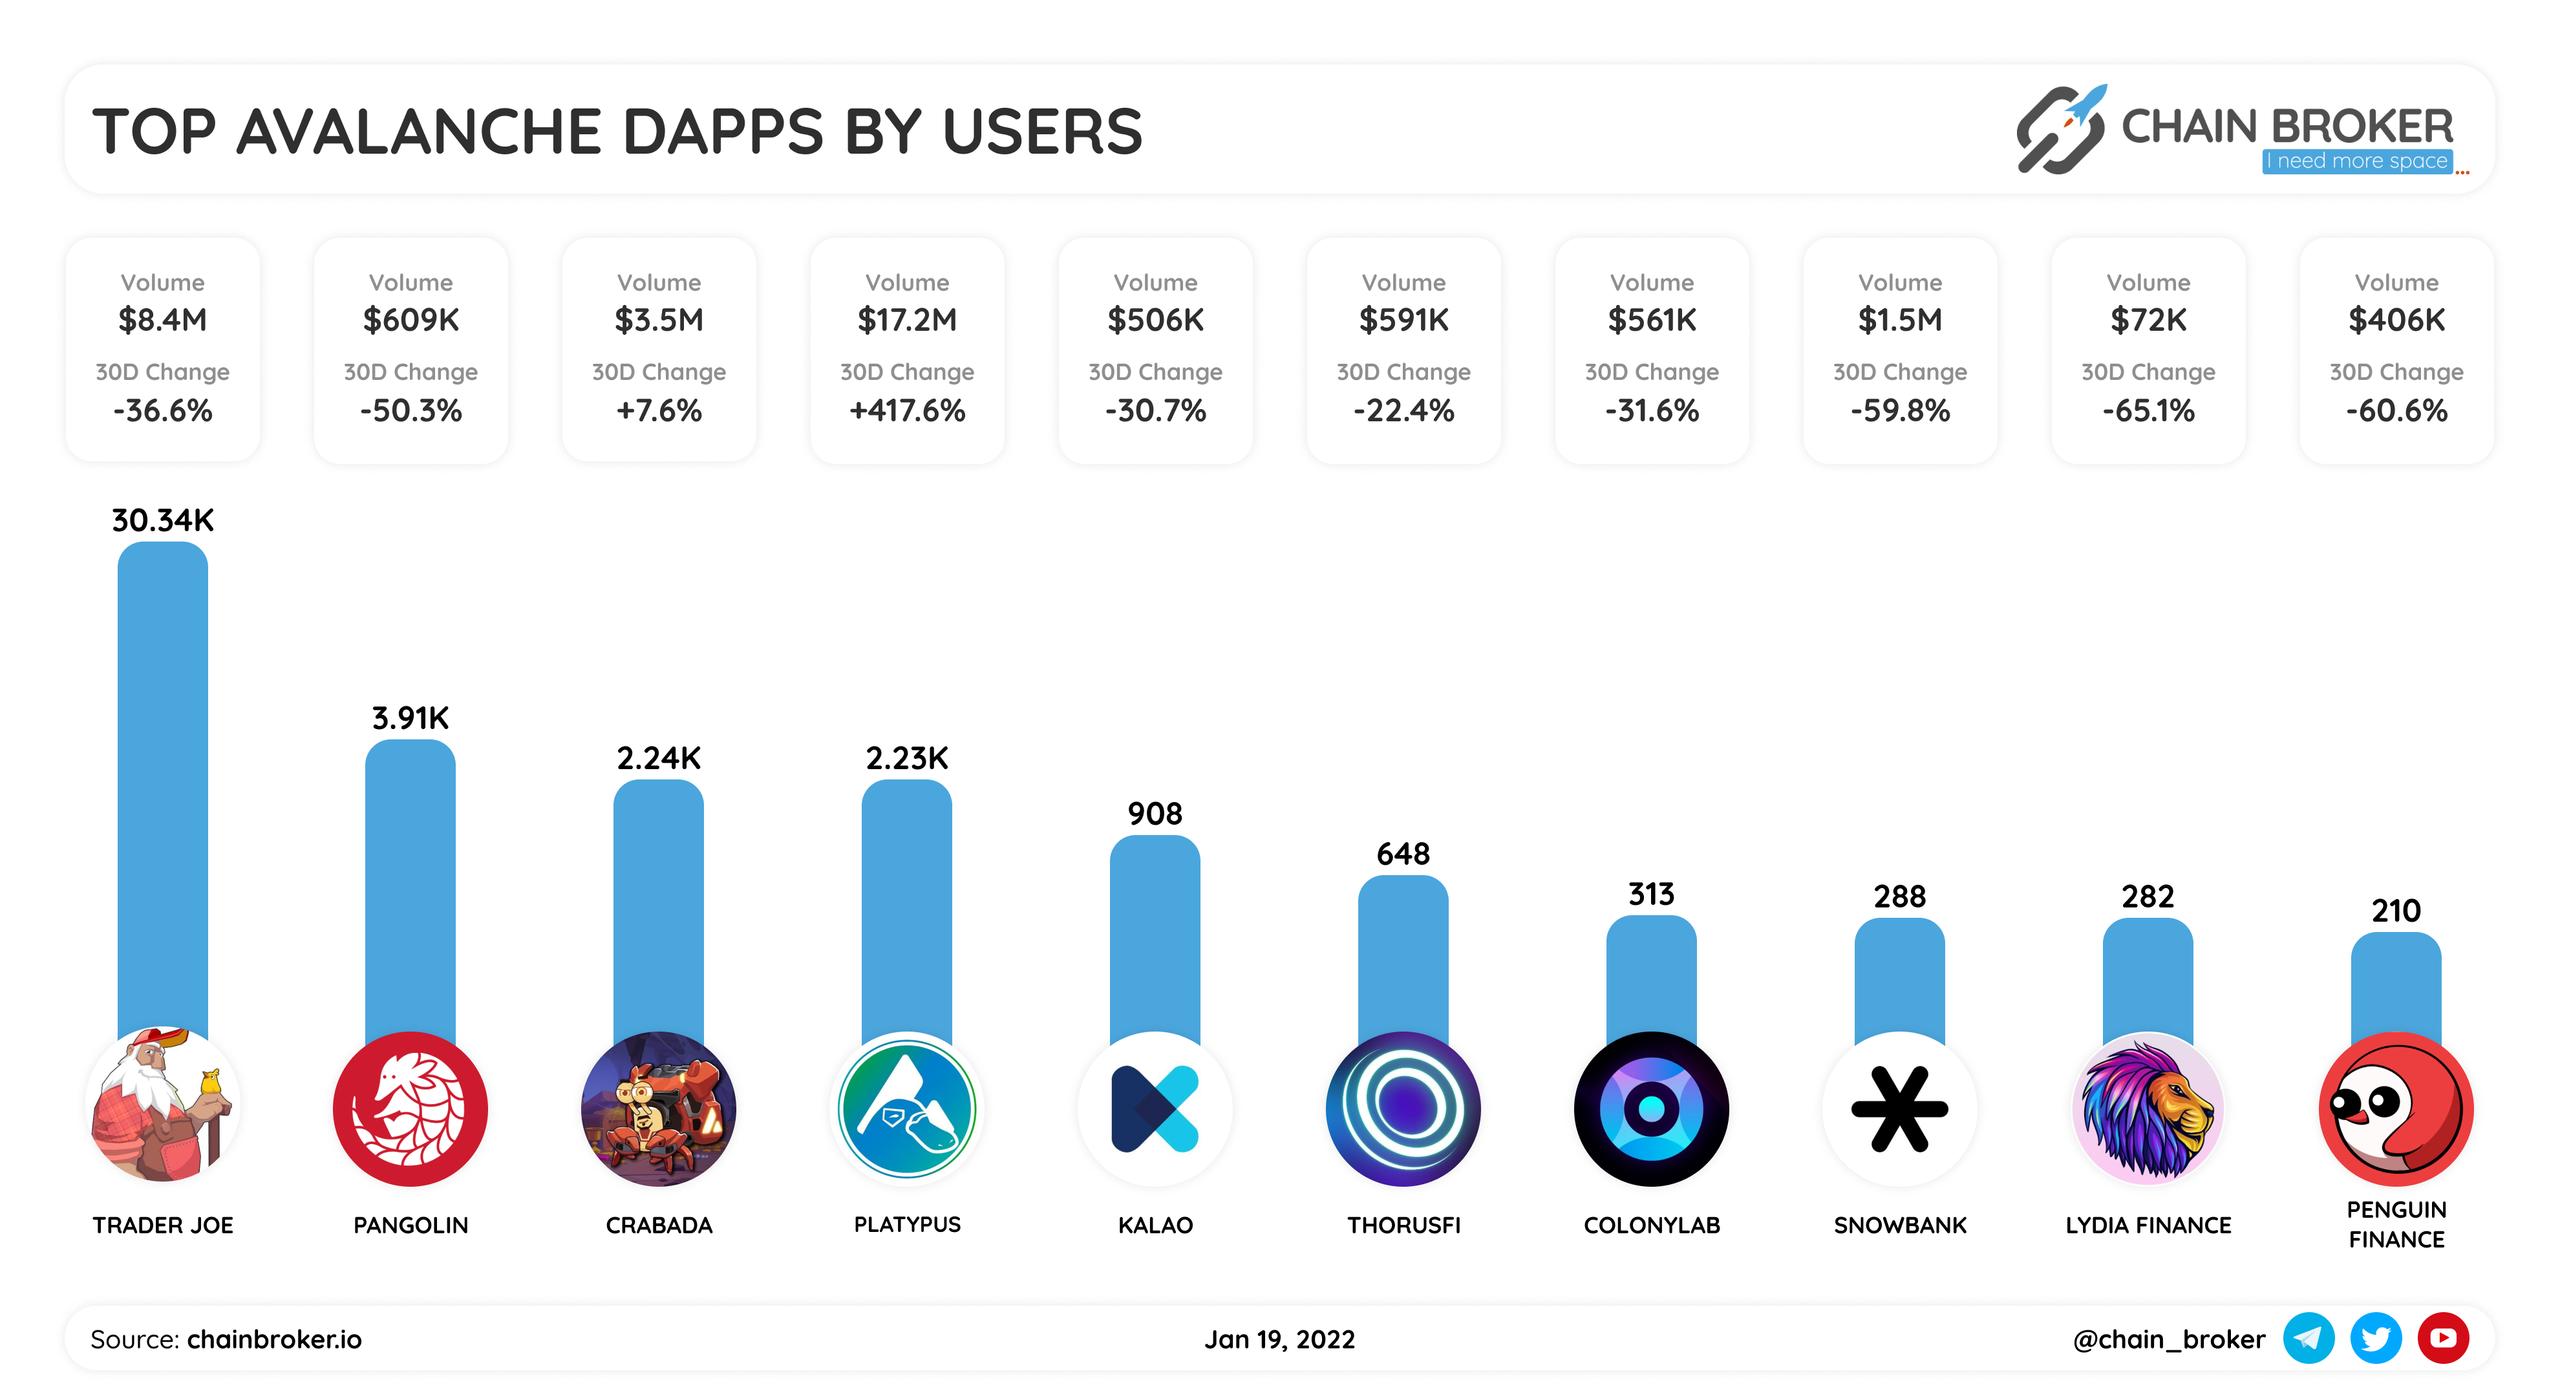 Top Avalanche Dapps rated by users